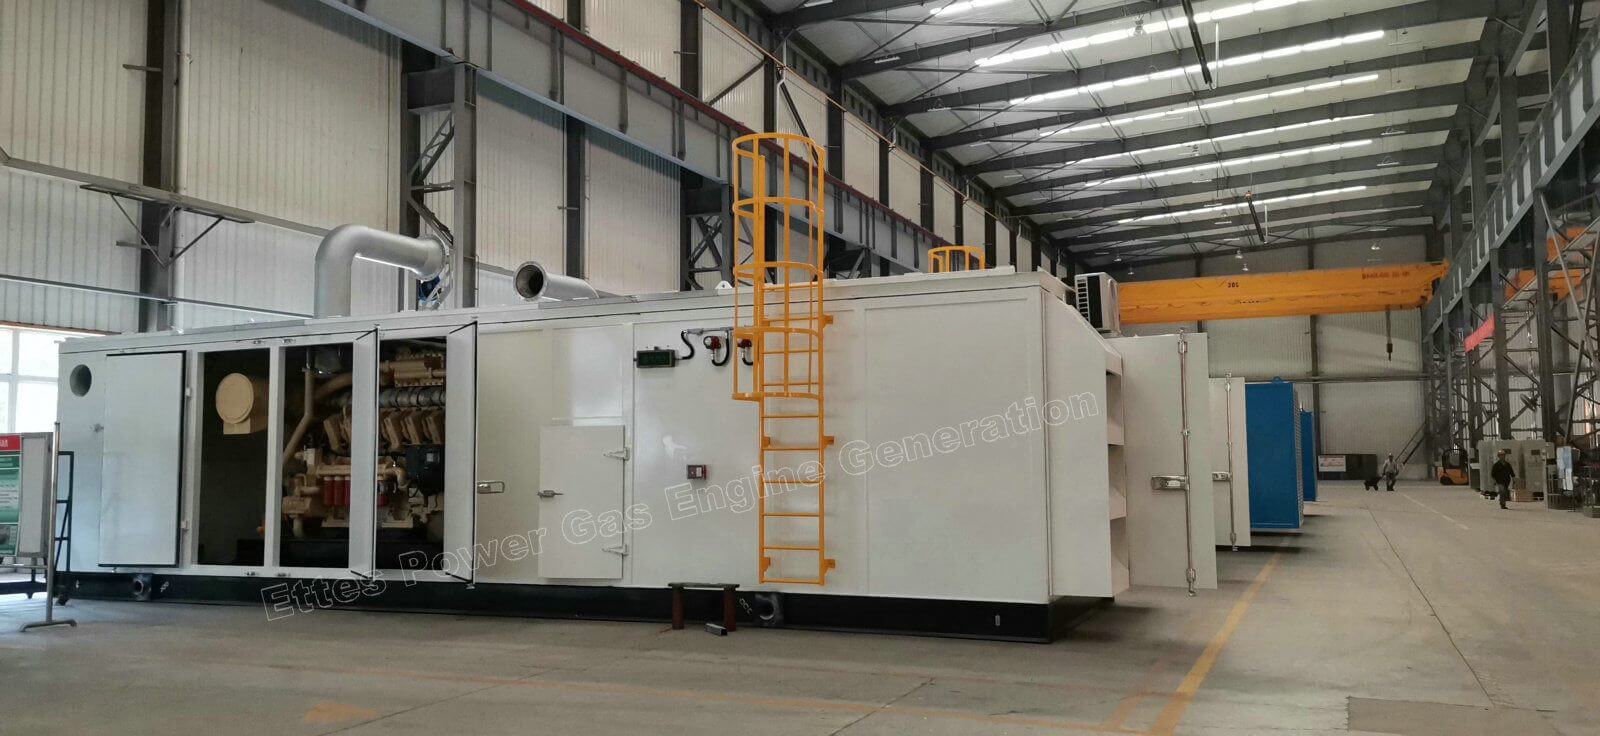 Ettespower MWM 1000kw 1000kva containerized natural gas generator set ETTES POWER